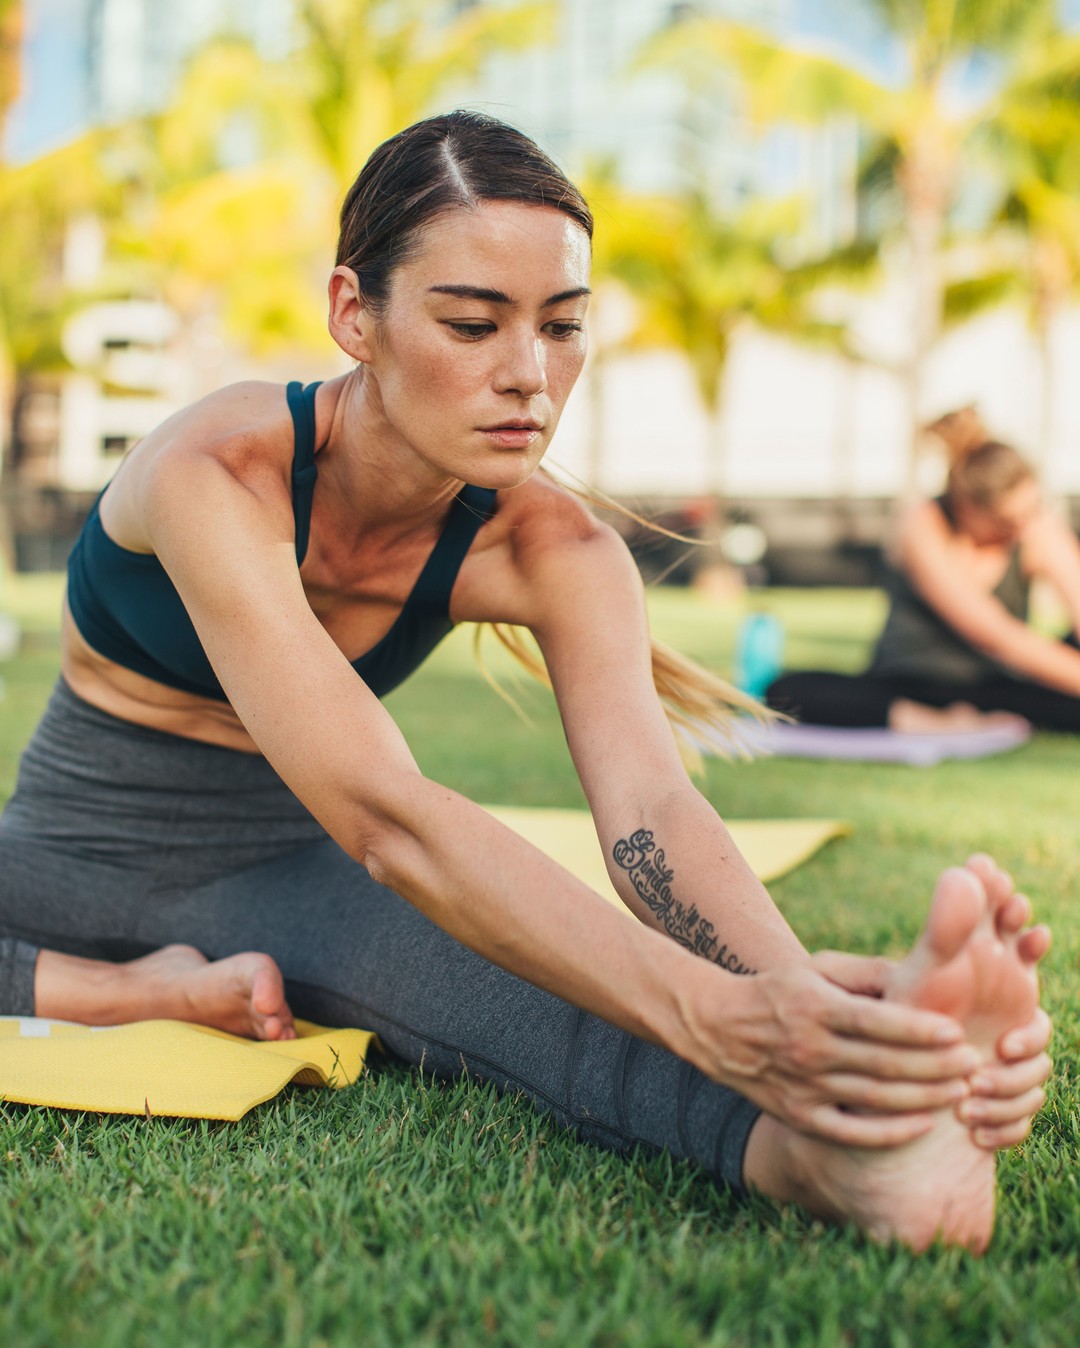 The only thing more invigorating than yoga? Yoga in the Park! 🧘‍♀️ Give your body a little fitness and a lot of fresh air, now twice a week on Mondays and Thursdays from 5:30-6:30pm at Victoria Ward Park.